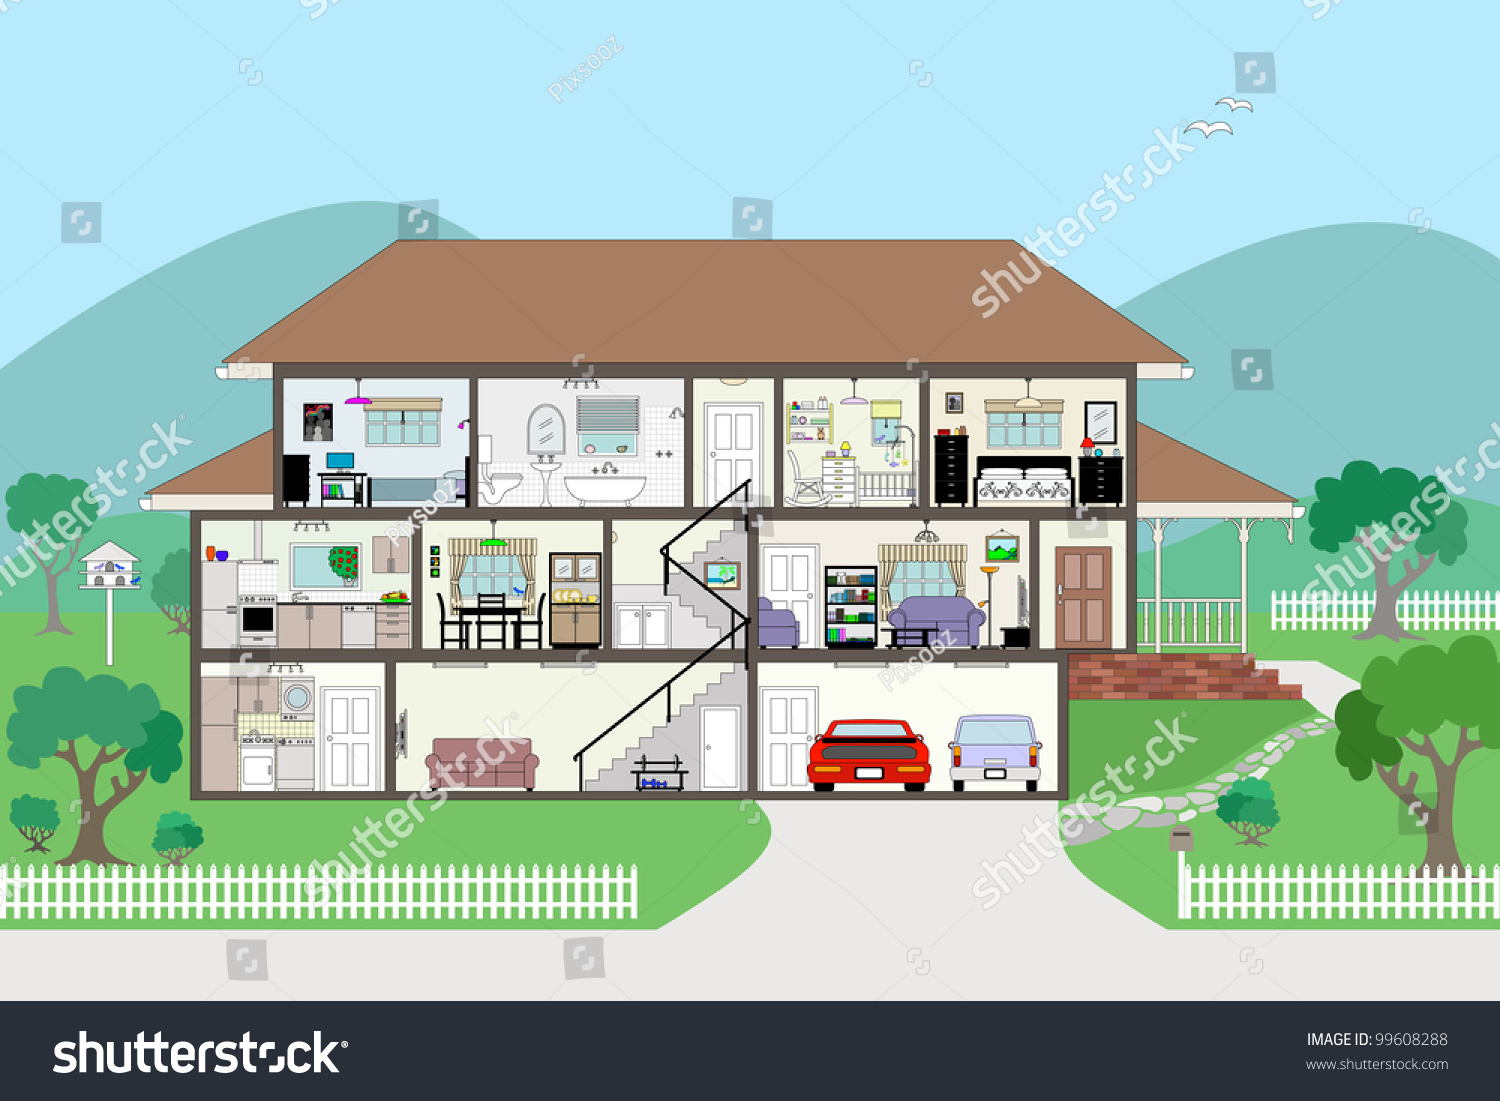 house side view clipart - photo #8